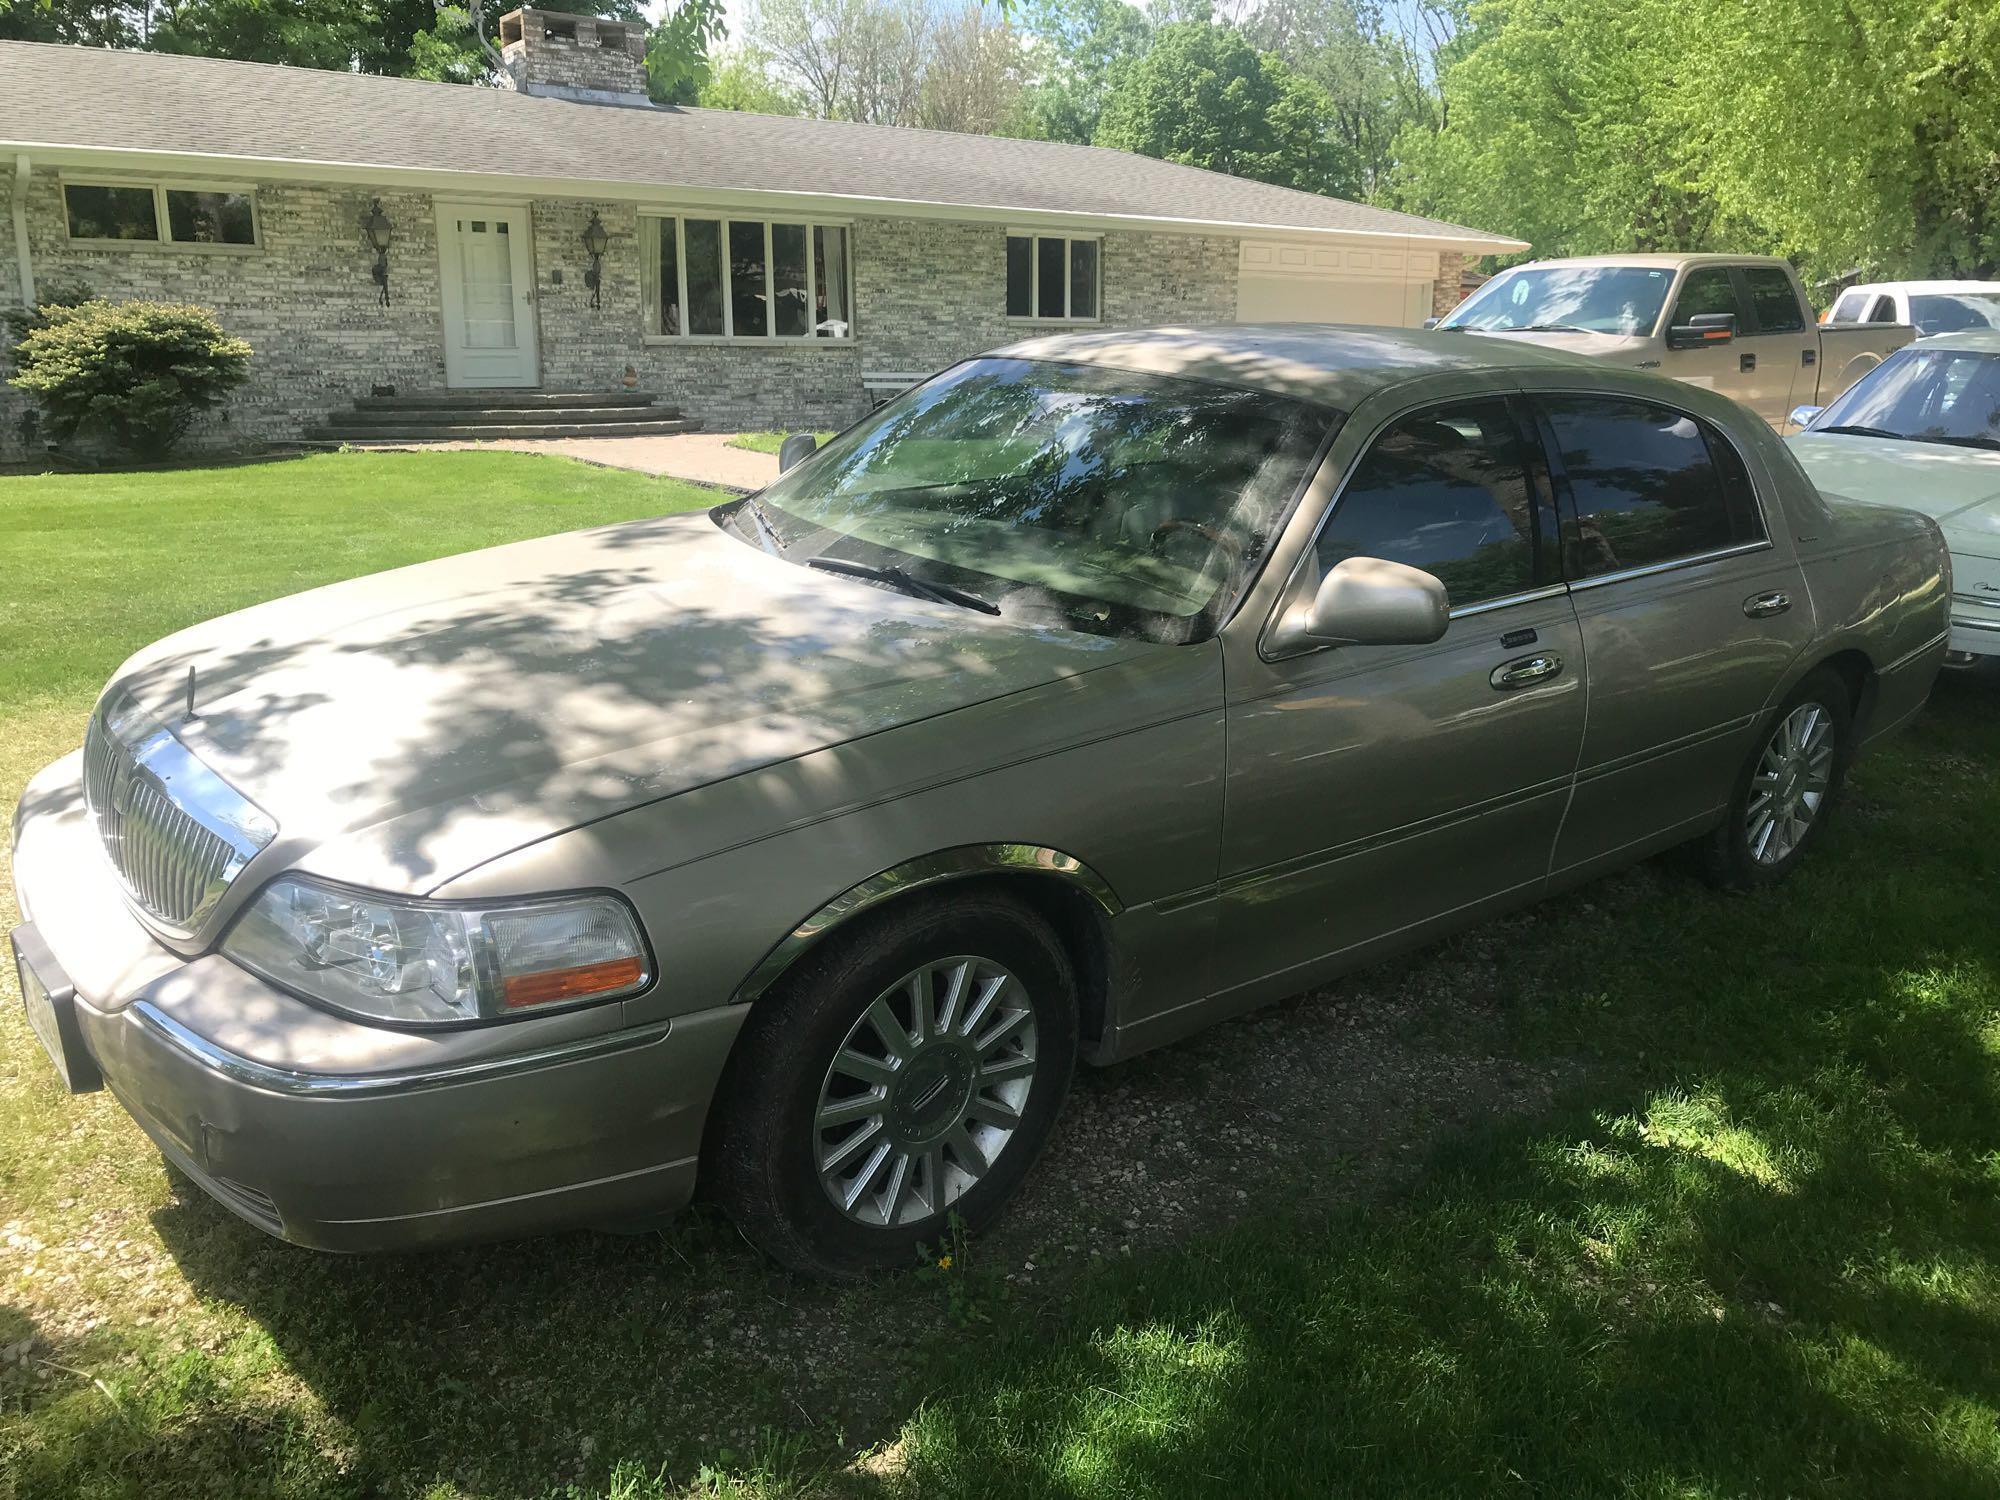 2003 Lincoln Town Car, Signature Series, 4 dr., V8, auto, keyless entry, leather, 80,000 miles